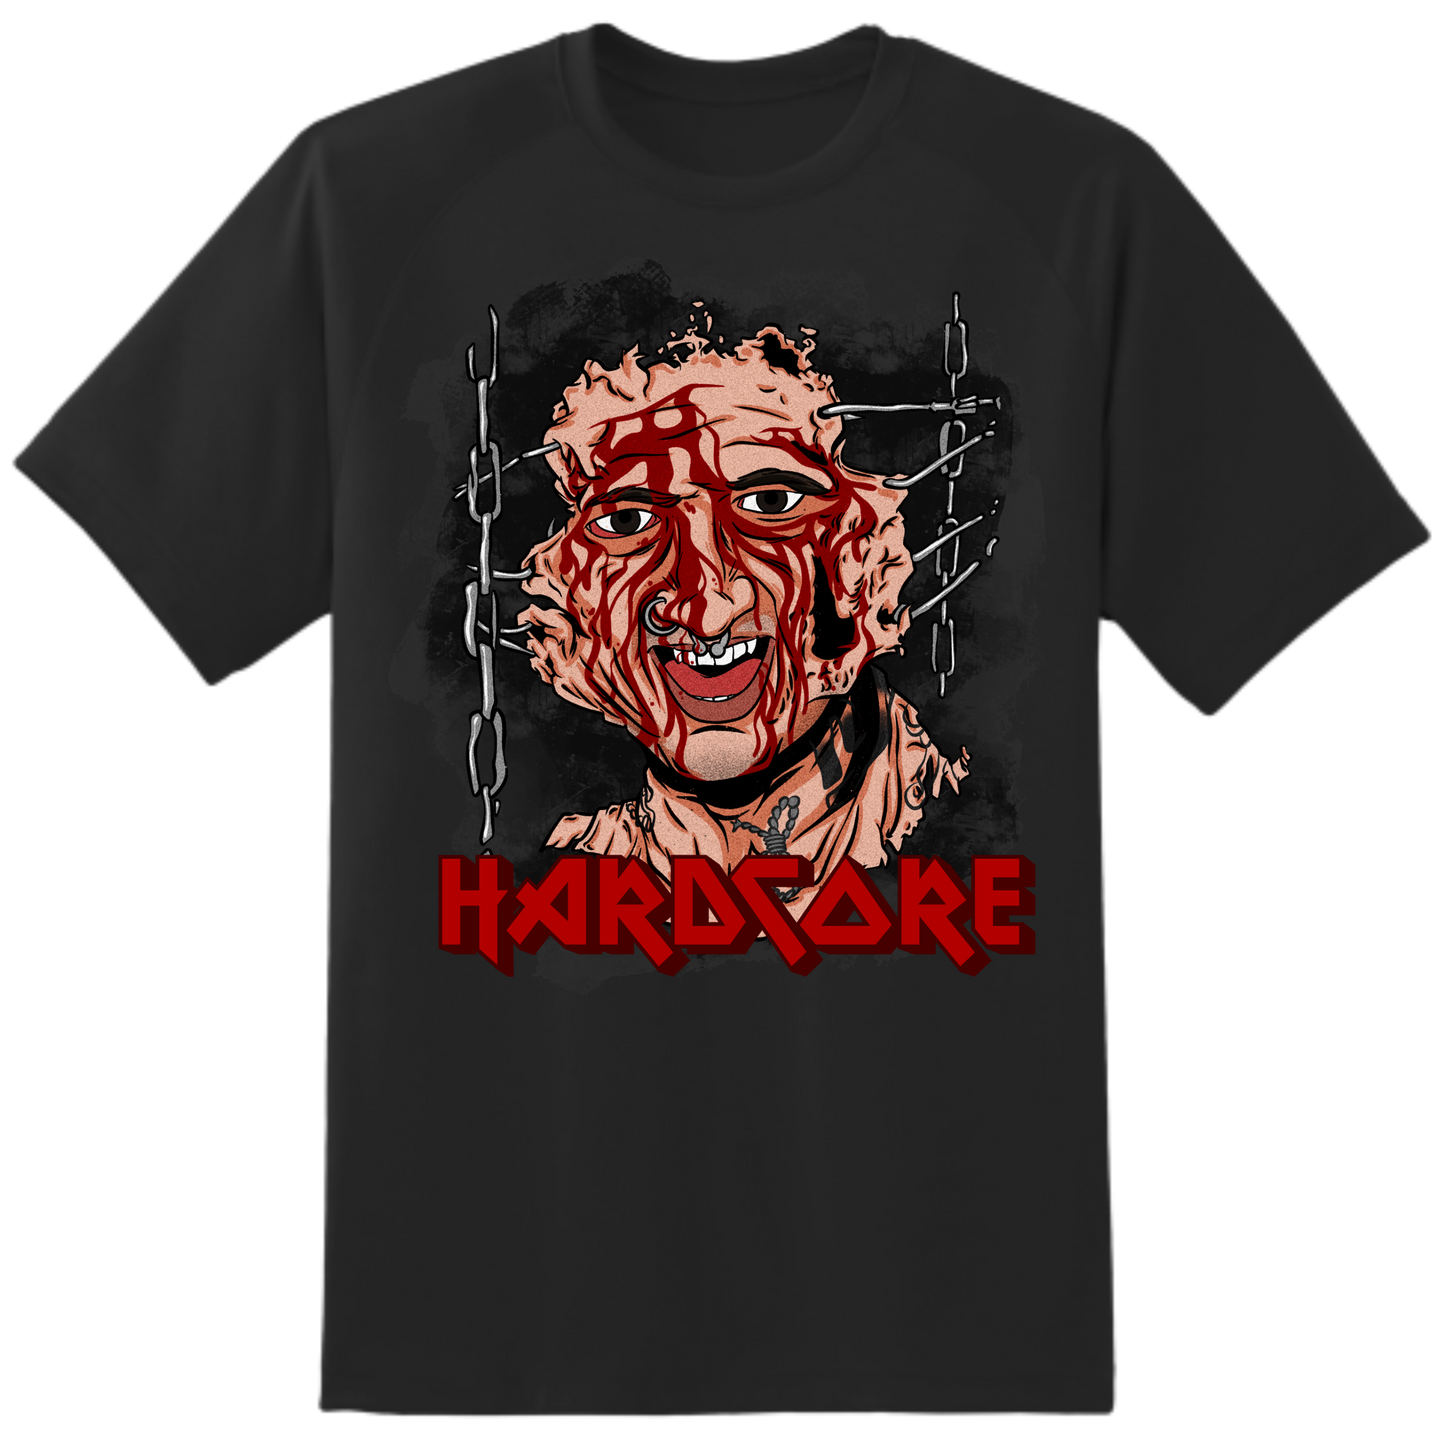 The Suffering (T-Shirt)